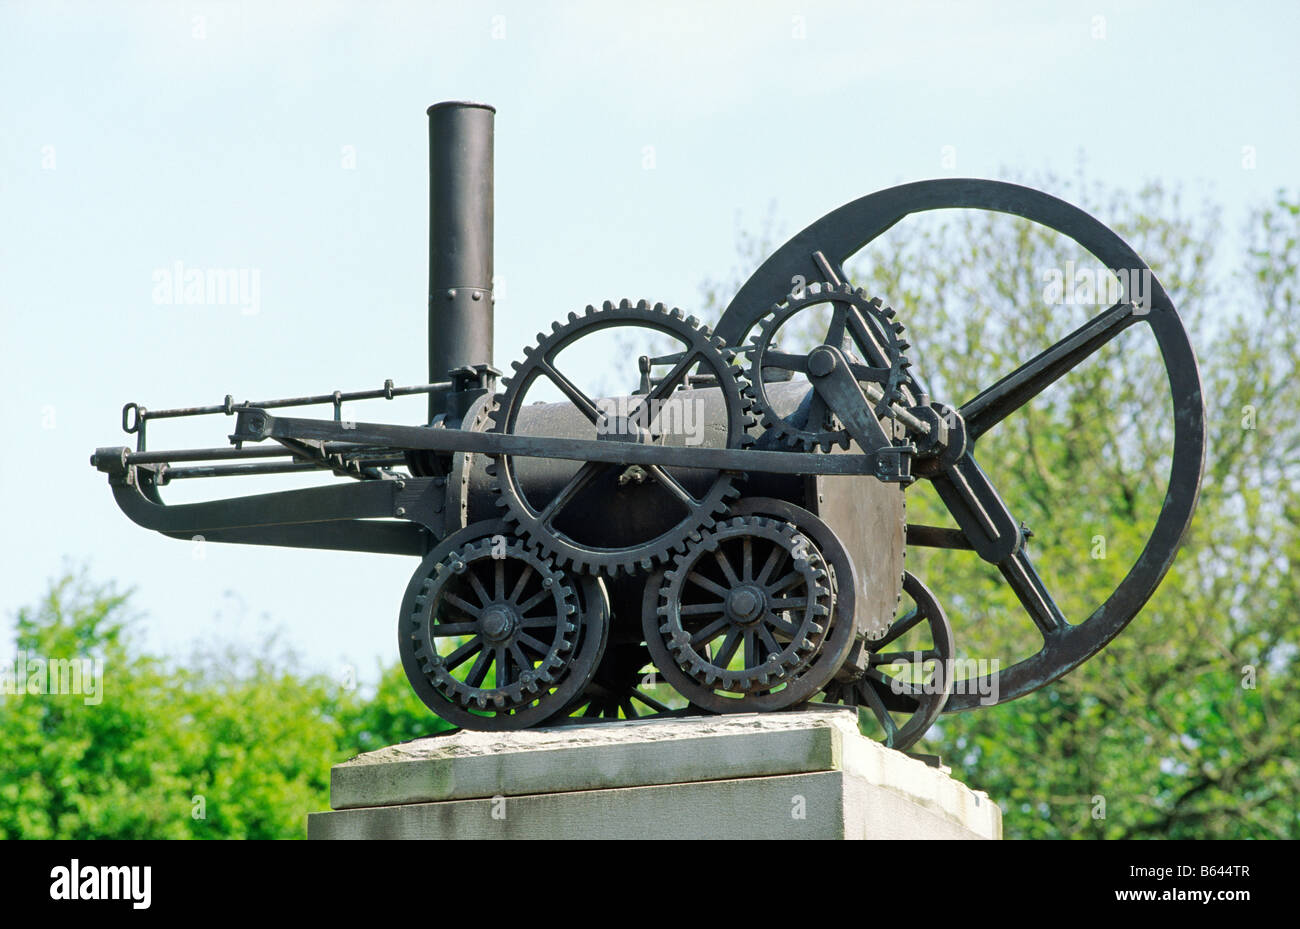 Merthyr Tydfil, Wales, UK. Replica of first steam engine track locomotive. Designed by Trevithick for Penydarren ironworks Stock Photo